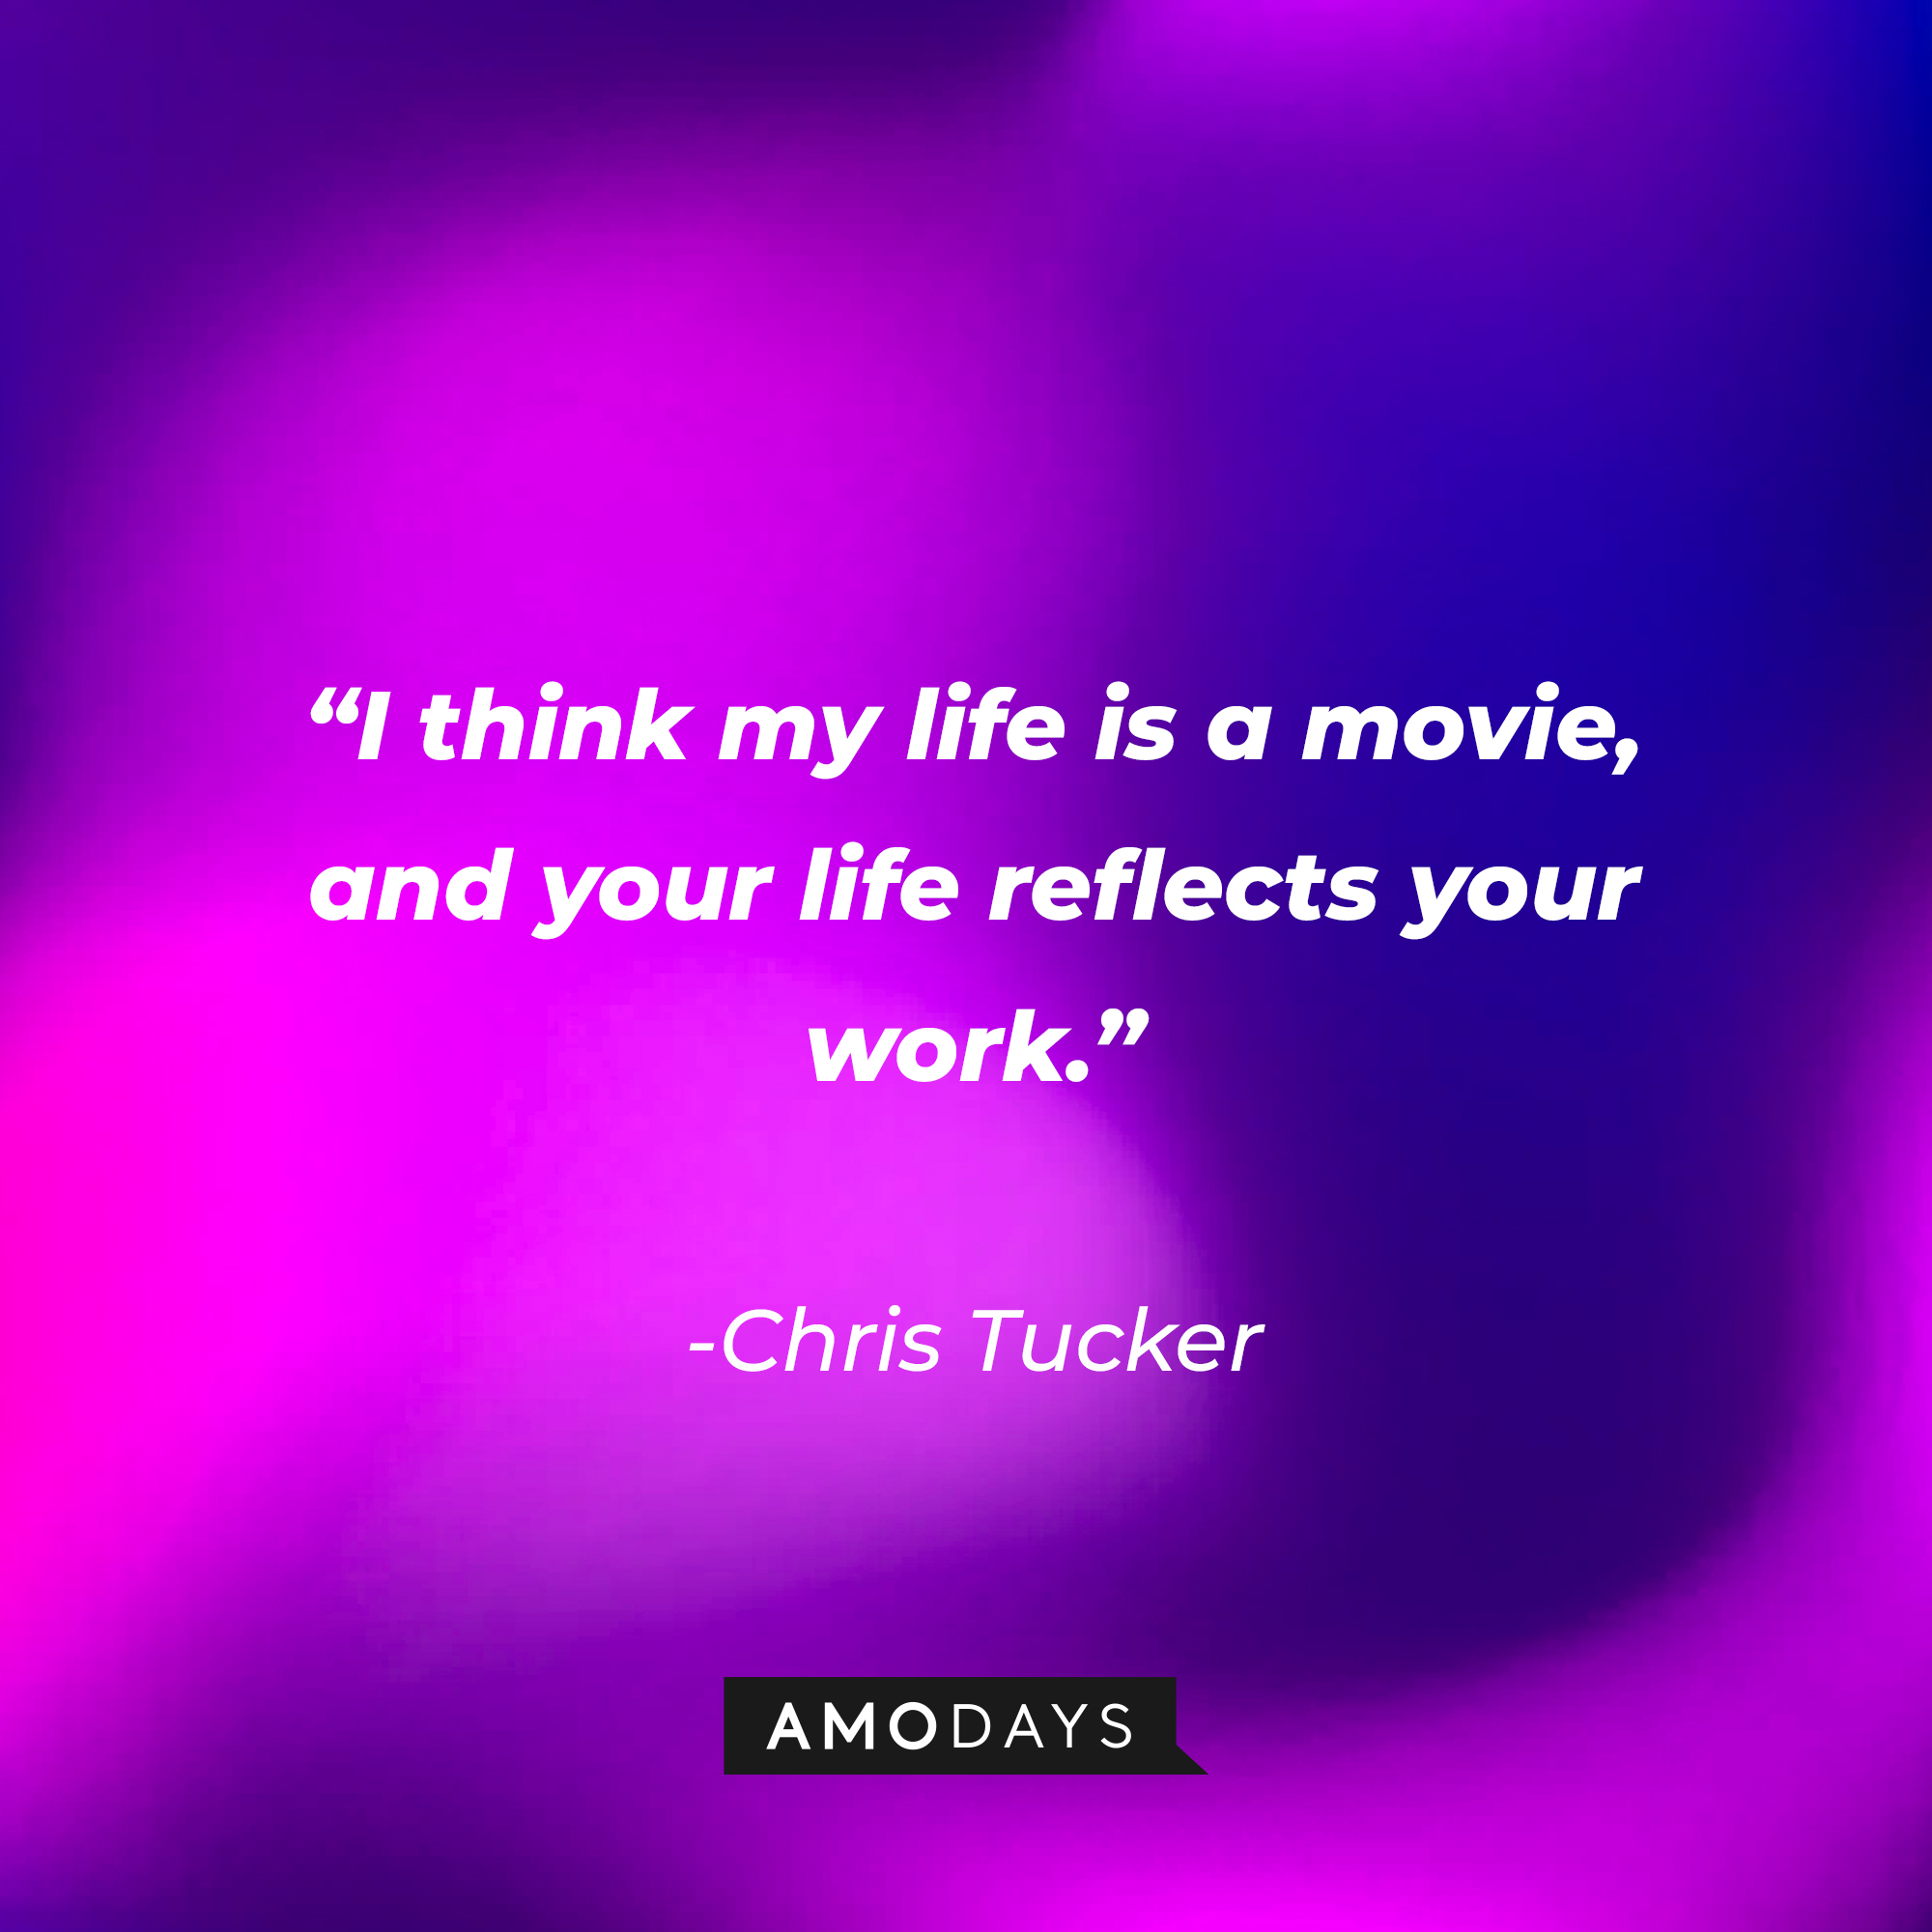 Chris Tucker’s quote:“I think my life is a movie and your life reflects your work.” ┃Source: AmoDays